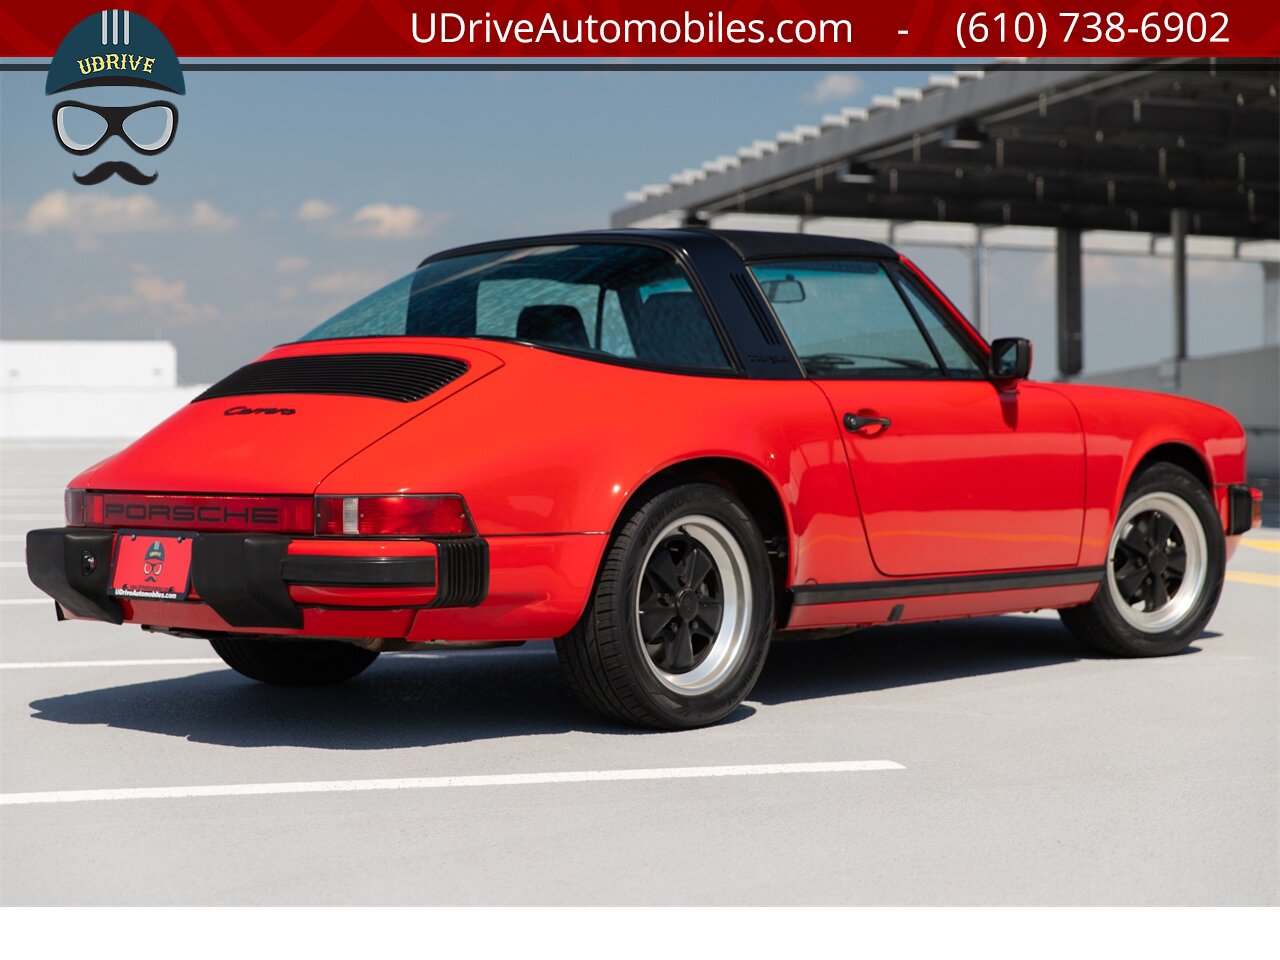 1986 Porsche 911 Carrera Targa 39k Miles Same Owner Since 1988  $23k in Service History Since 2011 - Photo 2 - West Chester, PA 19382